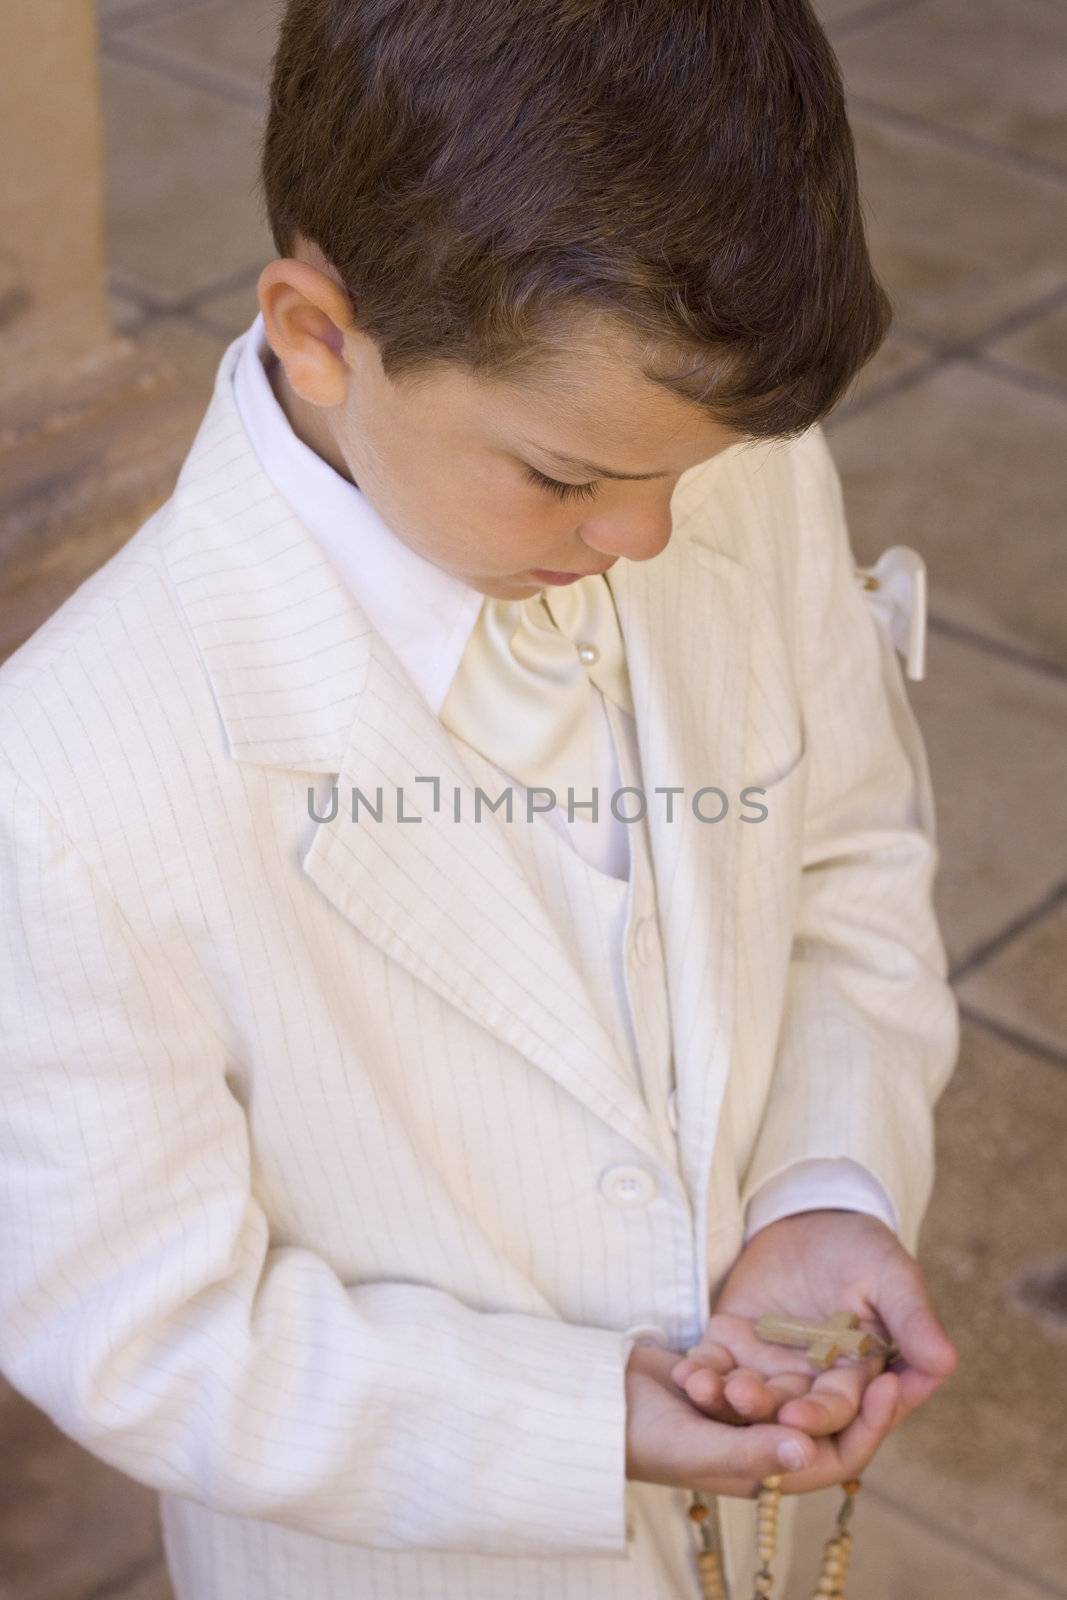 Child holding a rosary with a crucifix during his first communion celebration